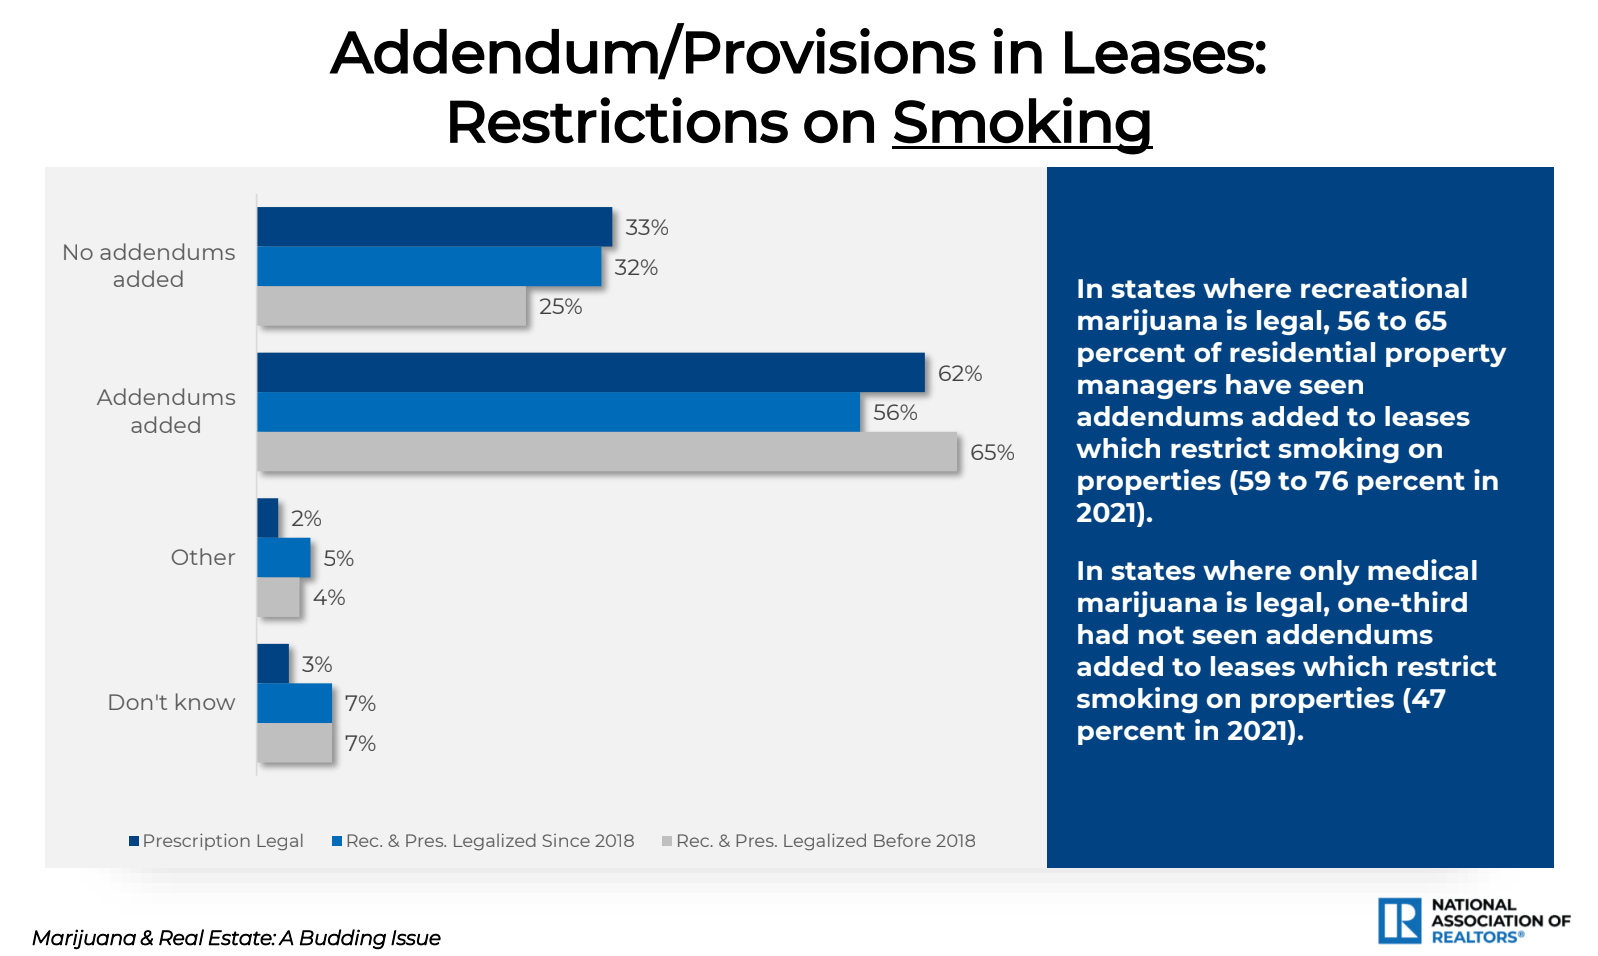 In states where recreational
marijuana is legal, 56 to 65
percent of residential property
managers have seen
addendums added to leases
which restrict smoking on
properties (59 to 76 percent in
2021).
In states where only medical
marijuana is legal, one-third
had not seen addendums
added to leases which restrict
smoking on properties (47
percent in 2021).